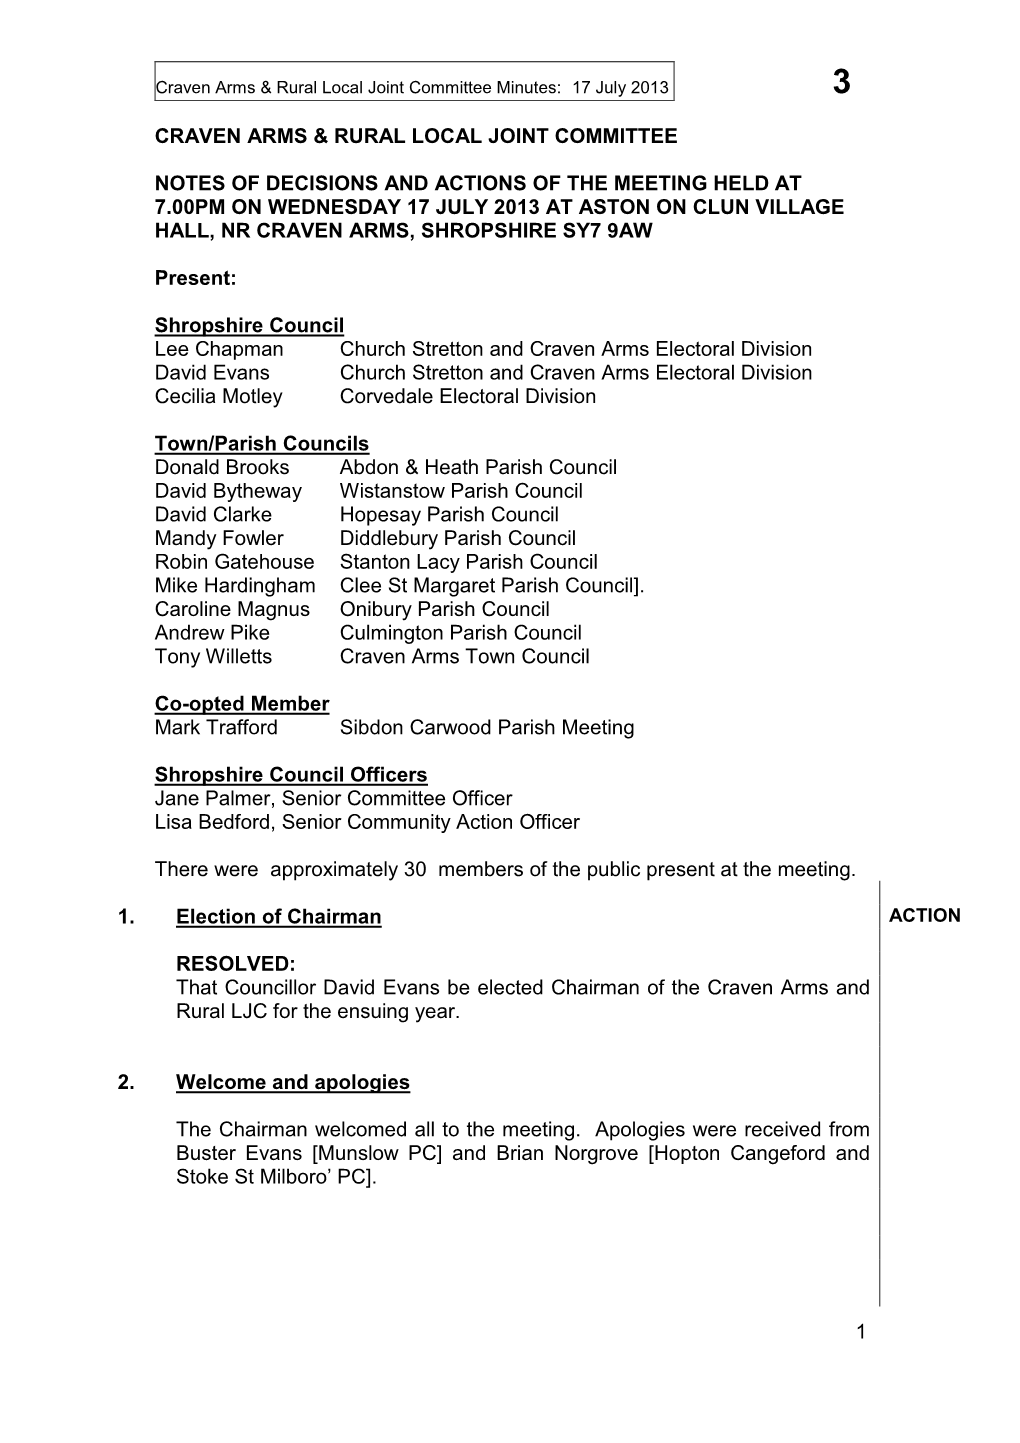 1 Craven Arms & Rural Local Joint Committee Notes of Decisions and Actions of the Meeting Held at 7.00Pm on Wednesday 17